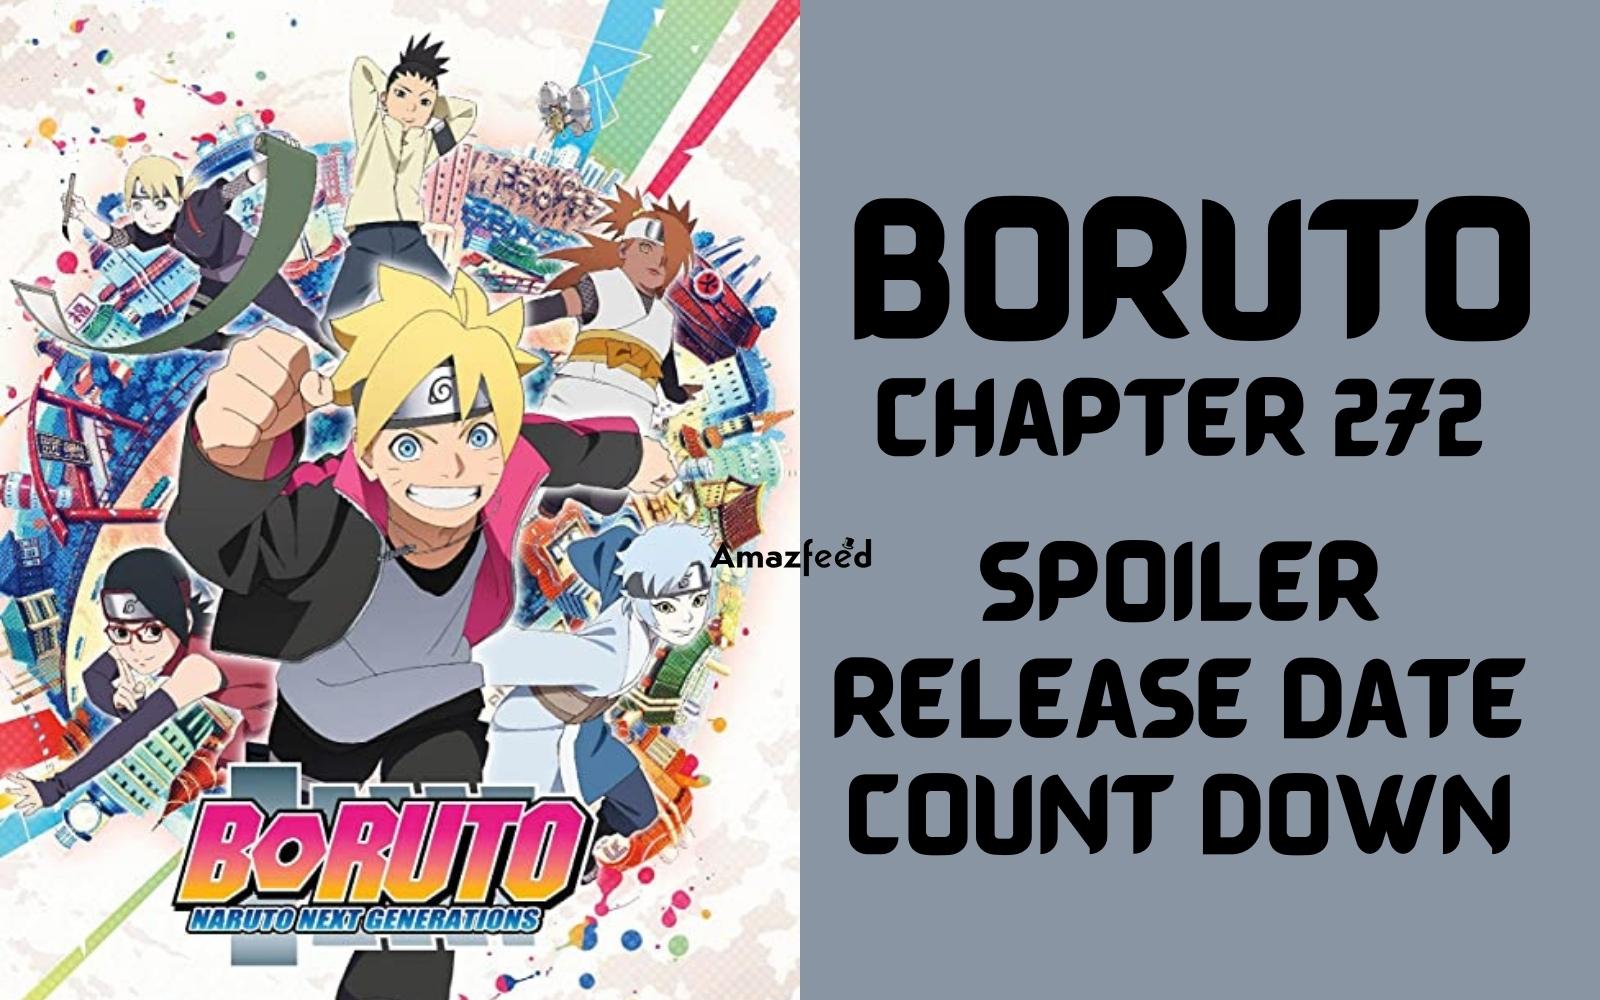 Boruto Episode 272 Spoiler, Release Date and Time, Countdown, Where to Watch, and More